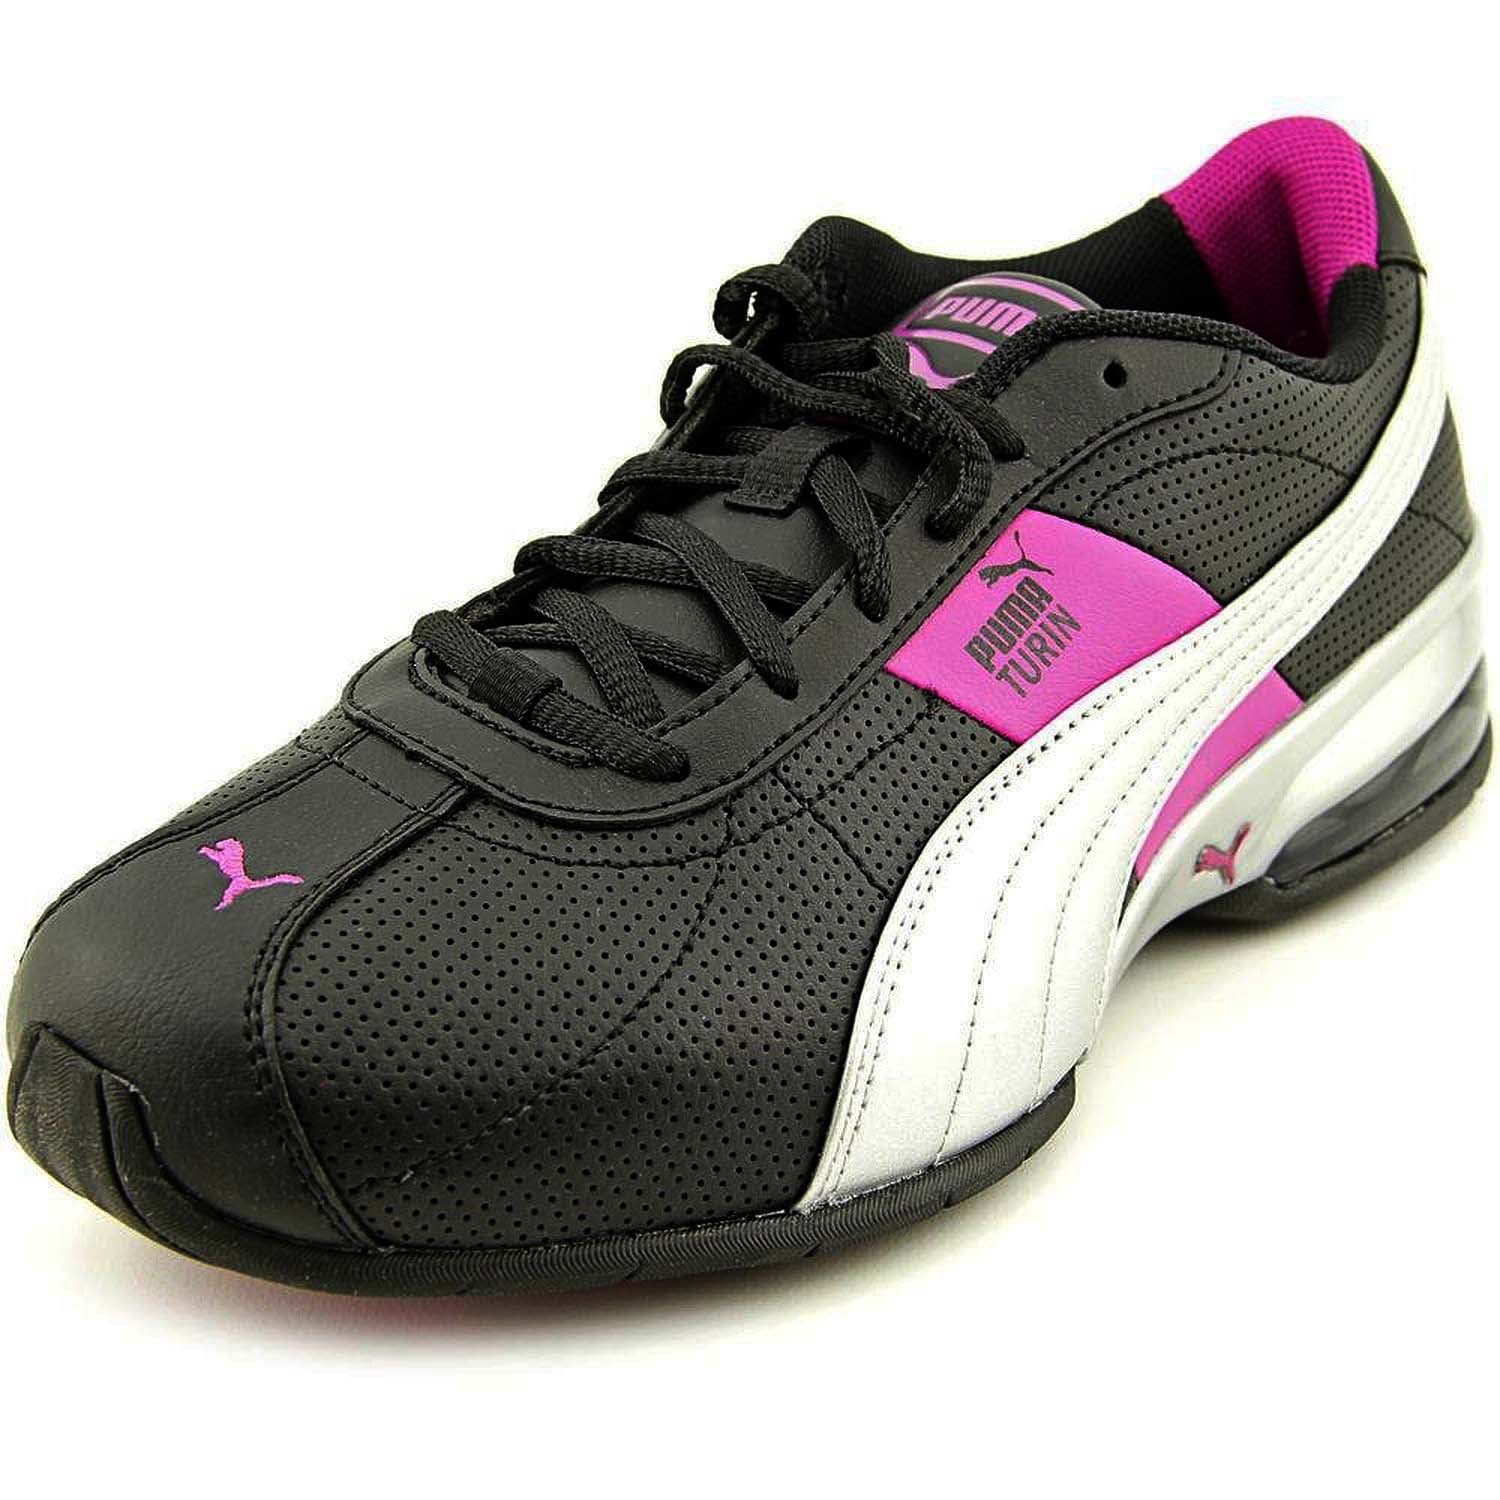 puma cell turin women's running shoes